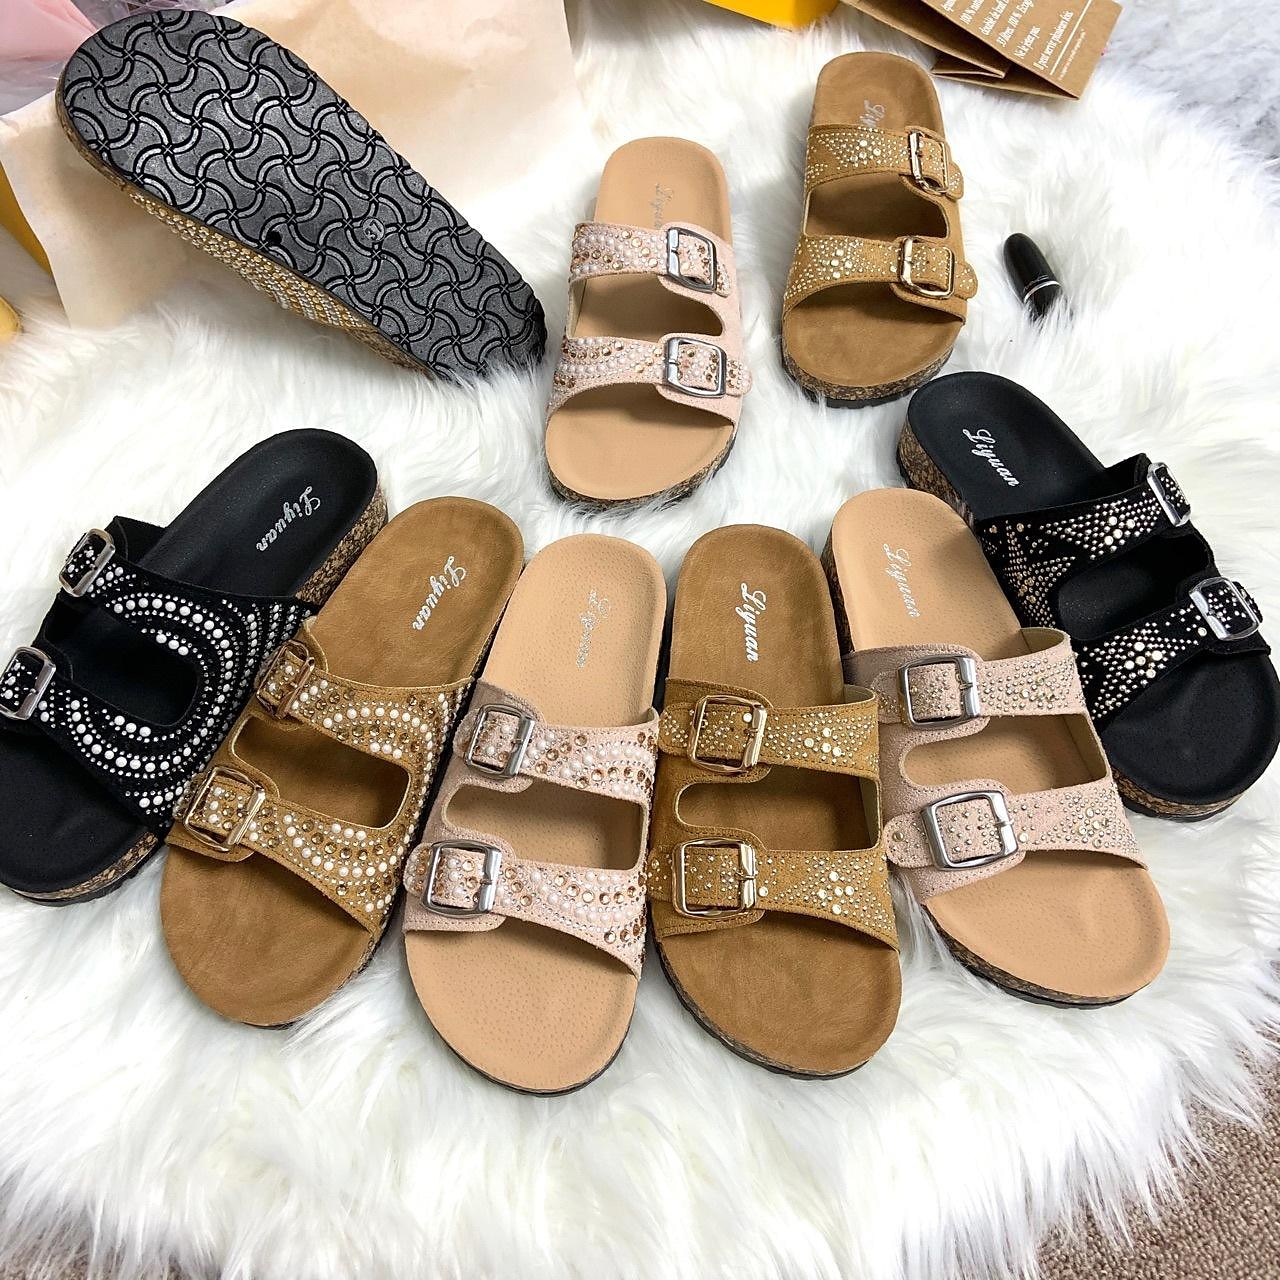 Mens Casual flip-Flop Sandals/Summer Beach Slippers/Current Lazy Slippers on Canvas/Straw Linen Shoes